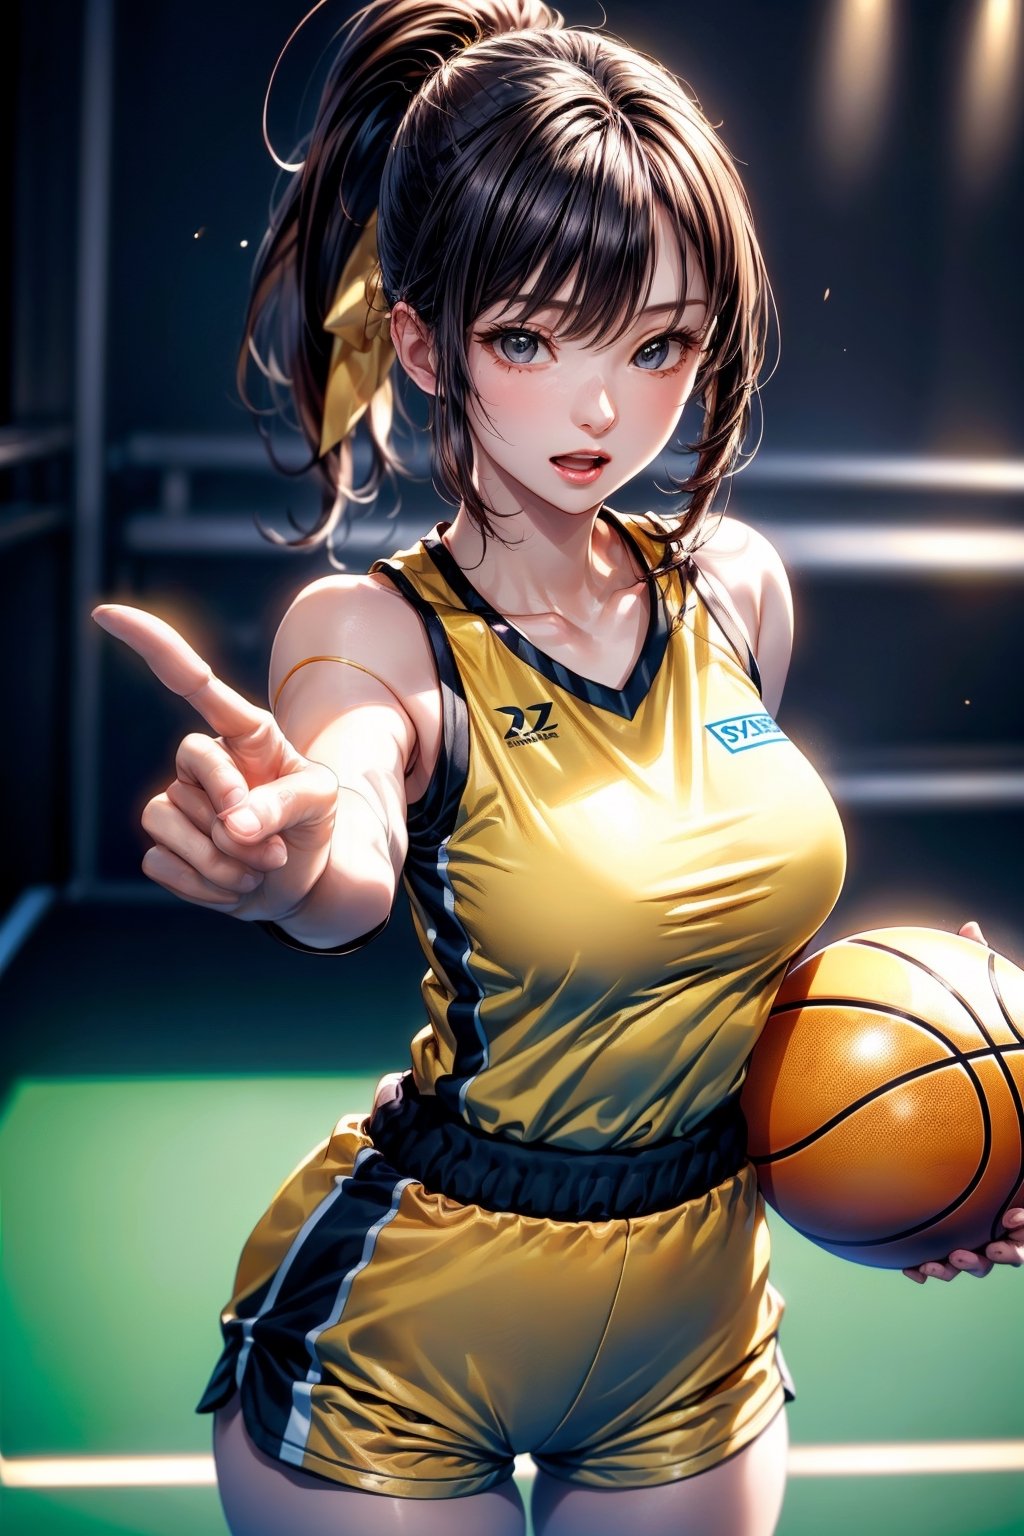 (((1ponytail hair girl:1.3, solo))), (a extremely pretty and beautiful milf:1.3), (22 years old: 1.1), (pointing at you:1.3), (stylish basketball posing:1.3), (open stance:1.3), (dribbling:1.3),  at basketball arena, 
break, 
(up-ponytail:1.3), (shiny-black thin hair:1.2), bangs, dark brown eyes, beautiful eyes, princess eyes, bangs, Hair between eyes, short hair:1.3, slender, (gigantic breasts:1.3, sagging breasts:1.3, disproportionate breasts;1.3), (thin waist: 1.3), (detailed beautiful girl: 1.4), Parted lips, Red lips, full-make-up face, (shiny skin), ((Perfect Female Body)), (upper body Image:1.3), Perfect Anatomy, Perfect Proportions, (most beautiful Asian actress face:1.3, extremely cute and beautiful Korean idol face:1.3), (seductive emotion:1.3), (blowjob face:1.3, open mouth:1.3), (4fingers and thumb:1.3), (perfect ratio human hands:1.3), 
BREAK, 
(wearing a yellow basketball unifrom:1.3), (sports shorts:1.3), (basketball shoes:1.3), detailed clothes, 
BREAK, 
a basketball arema, basketball, baseketball goal, audience, player, coach, 
BREAK, 
(Realistic, Photorealistic: 1.37), (Masterpiece, Best Quality: 1.2), (Ultra High Resolution: 1.2), (RAW Photo: 1.2), (Sharp Focus: 1.3), (Face Focus: 1.2), (Ultra Detailed CG Unified 8k Wallpaper: 1.2), (Beautiful Skin: 1.2), (pale Skin:1.3), (Hyper Sharp Focus: 1.5), (Ultra Sharp Focus: 1.5), (Beautiful pretty face: 1.3), (super detailed background, detail background: 1.3), Ultra Realistic Photo, Hyper Sharp Image, Hyper Detail Image, ,Indoor Grey